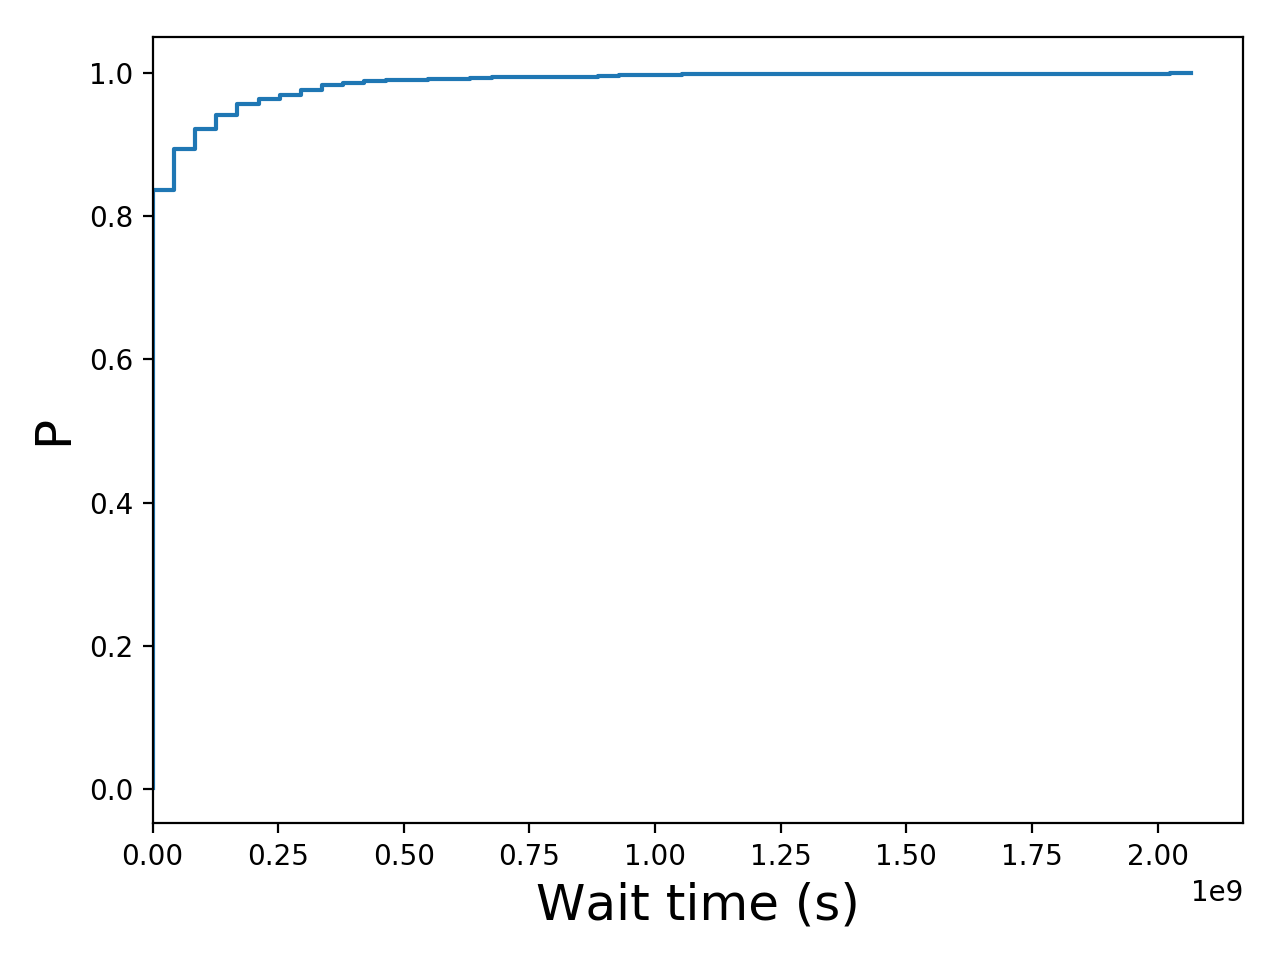 Task wait time CDF graph for the Two_Sigma_pit trace.